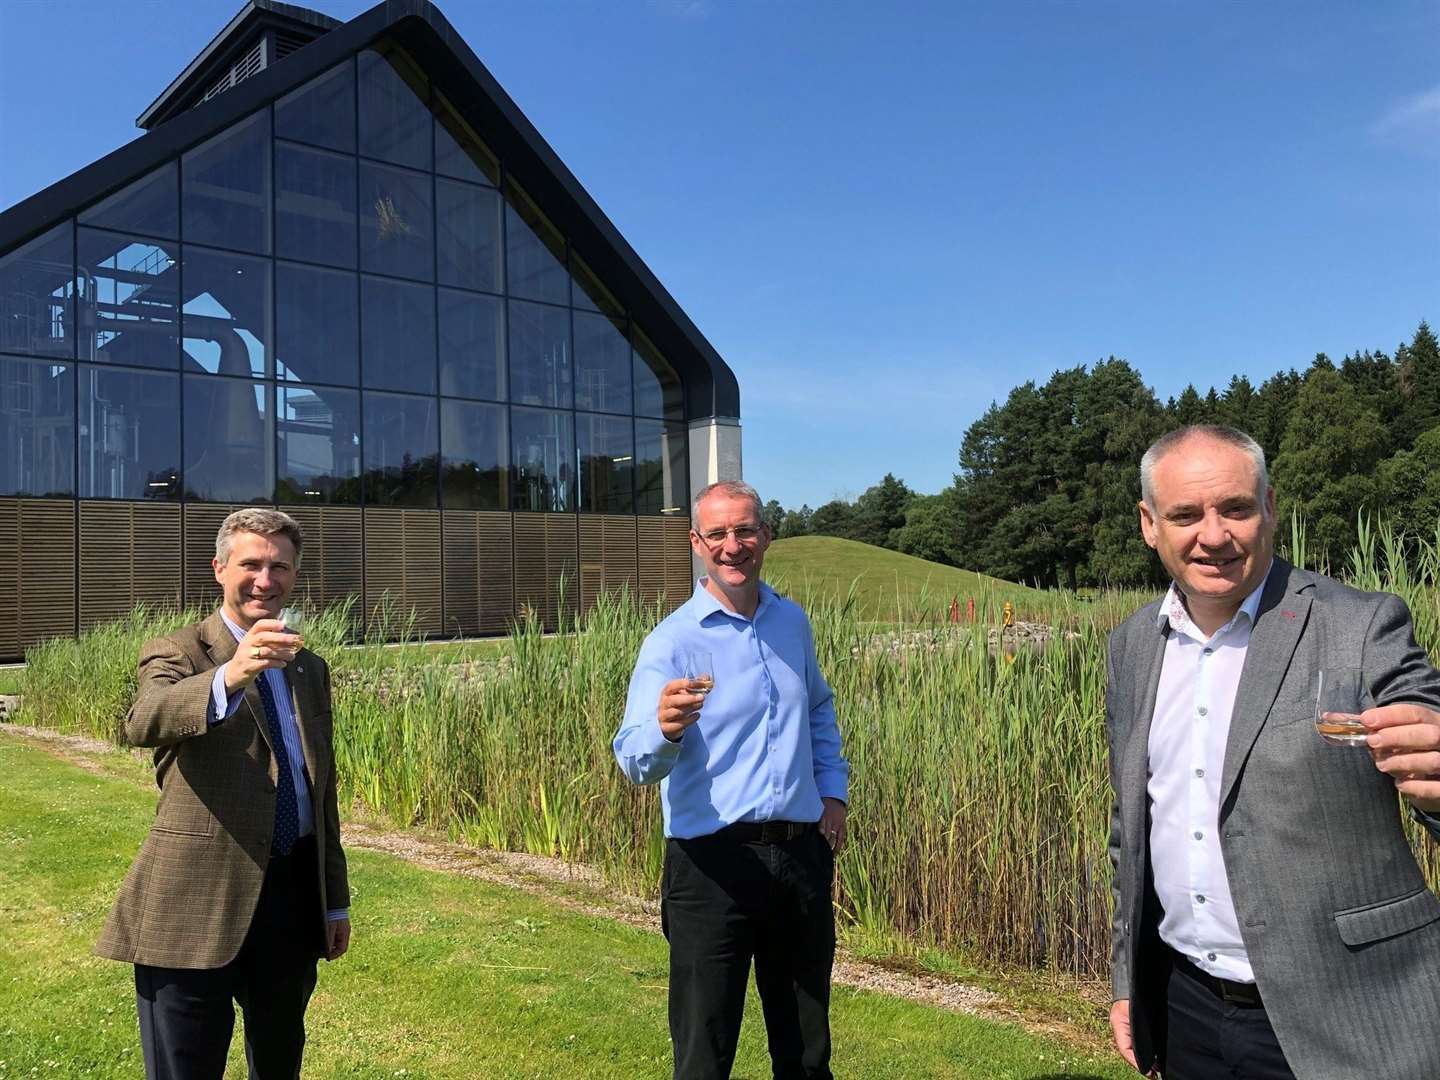 Pictured from left to right: Ronald Daalmans, sustainability manager with Chivas; Graeme Cruikshank, distillery manager with Chivas; Moray's MSP Richard Lochhead.